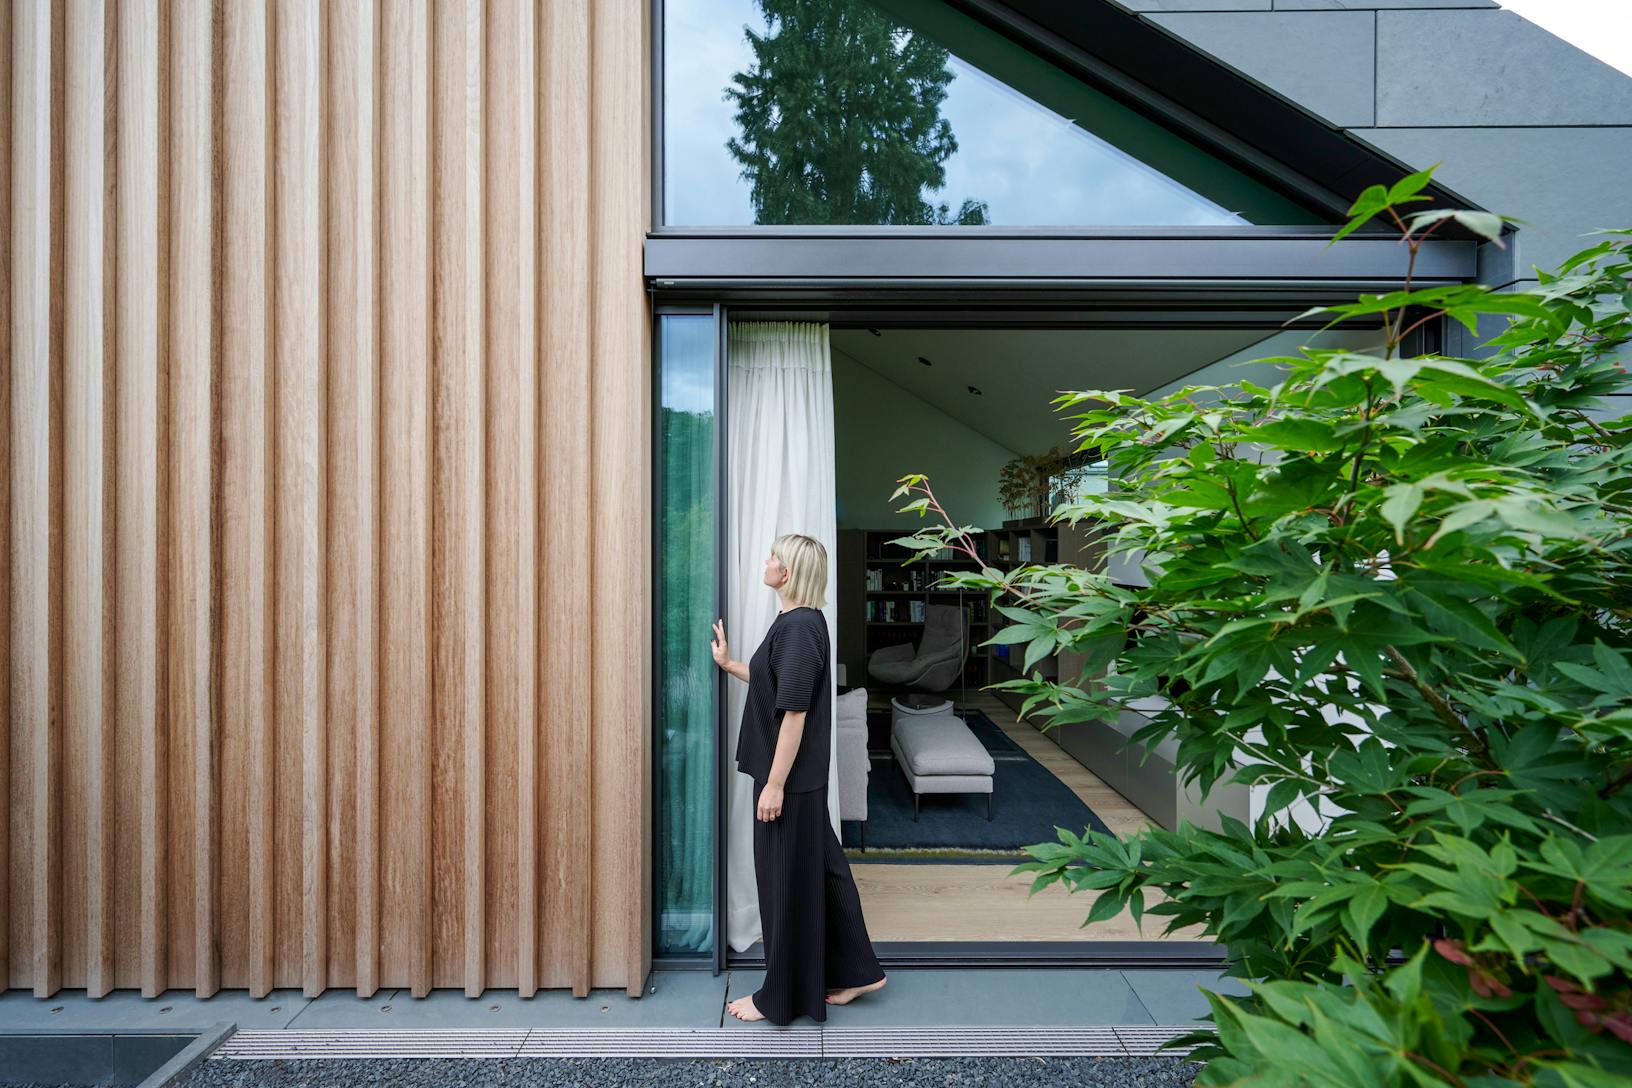 A woman is standing outside of a modern house with sliding glass walls